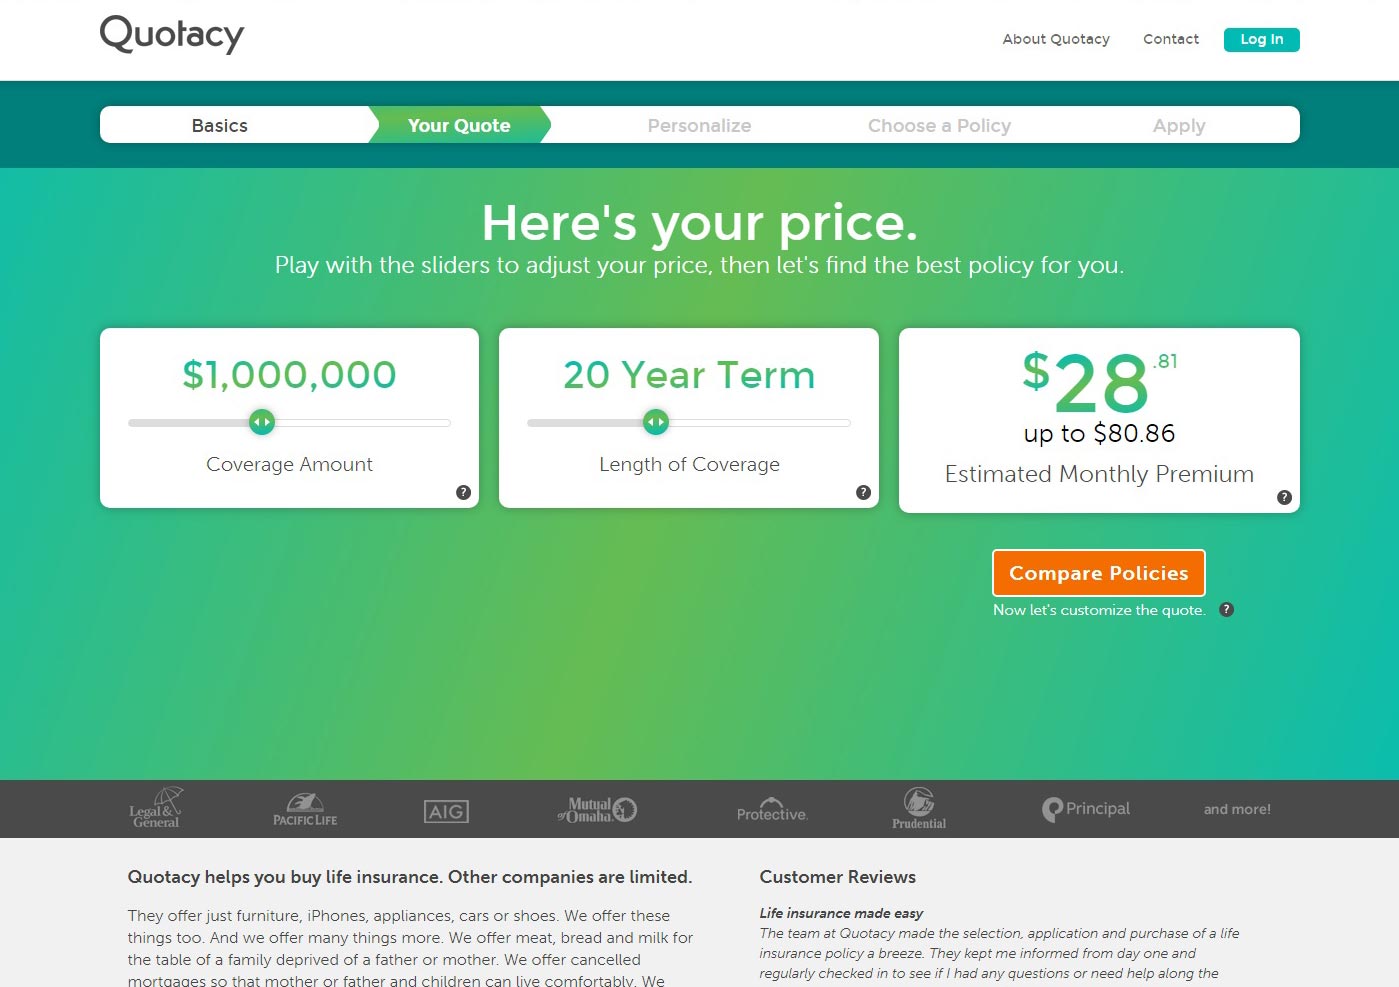 screenshot of Quotacy quoting tool showing $1,000,000 term life insurance policy